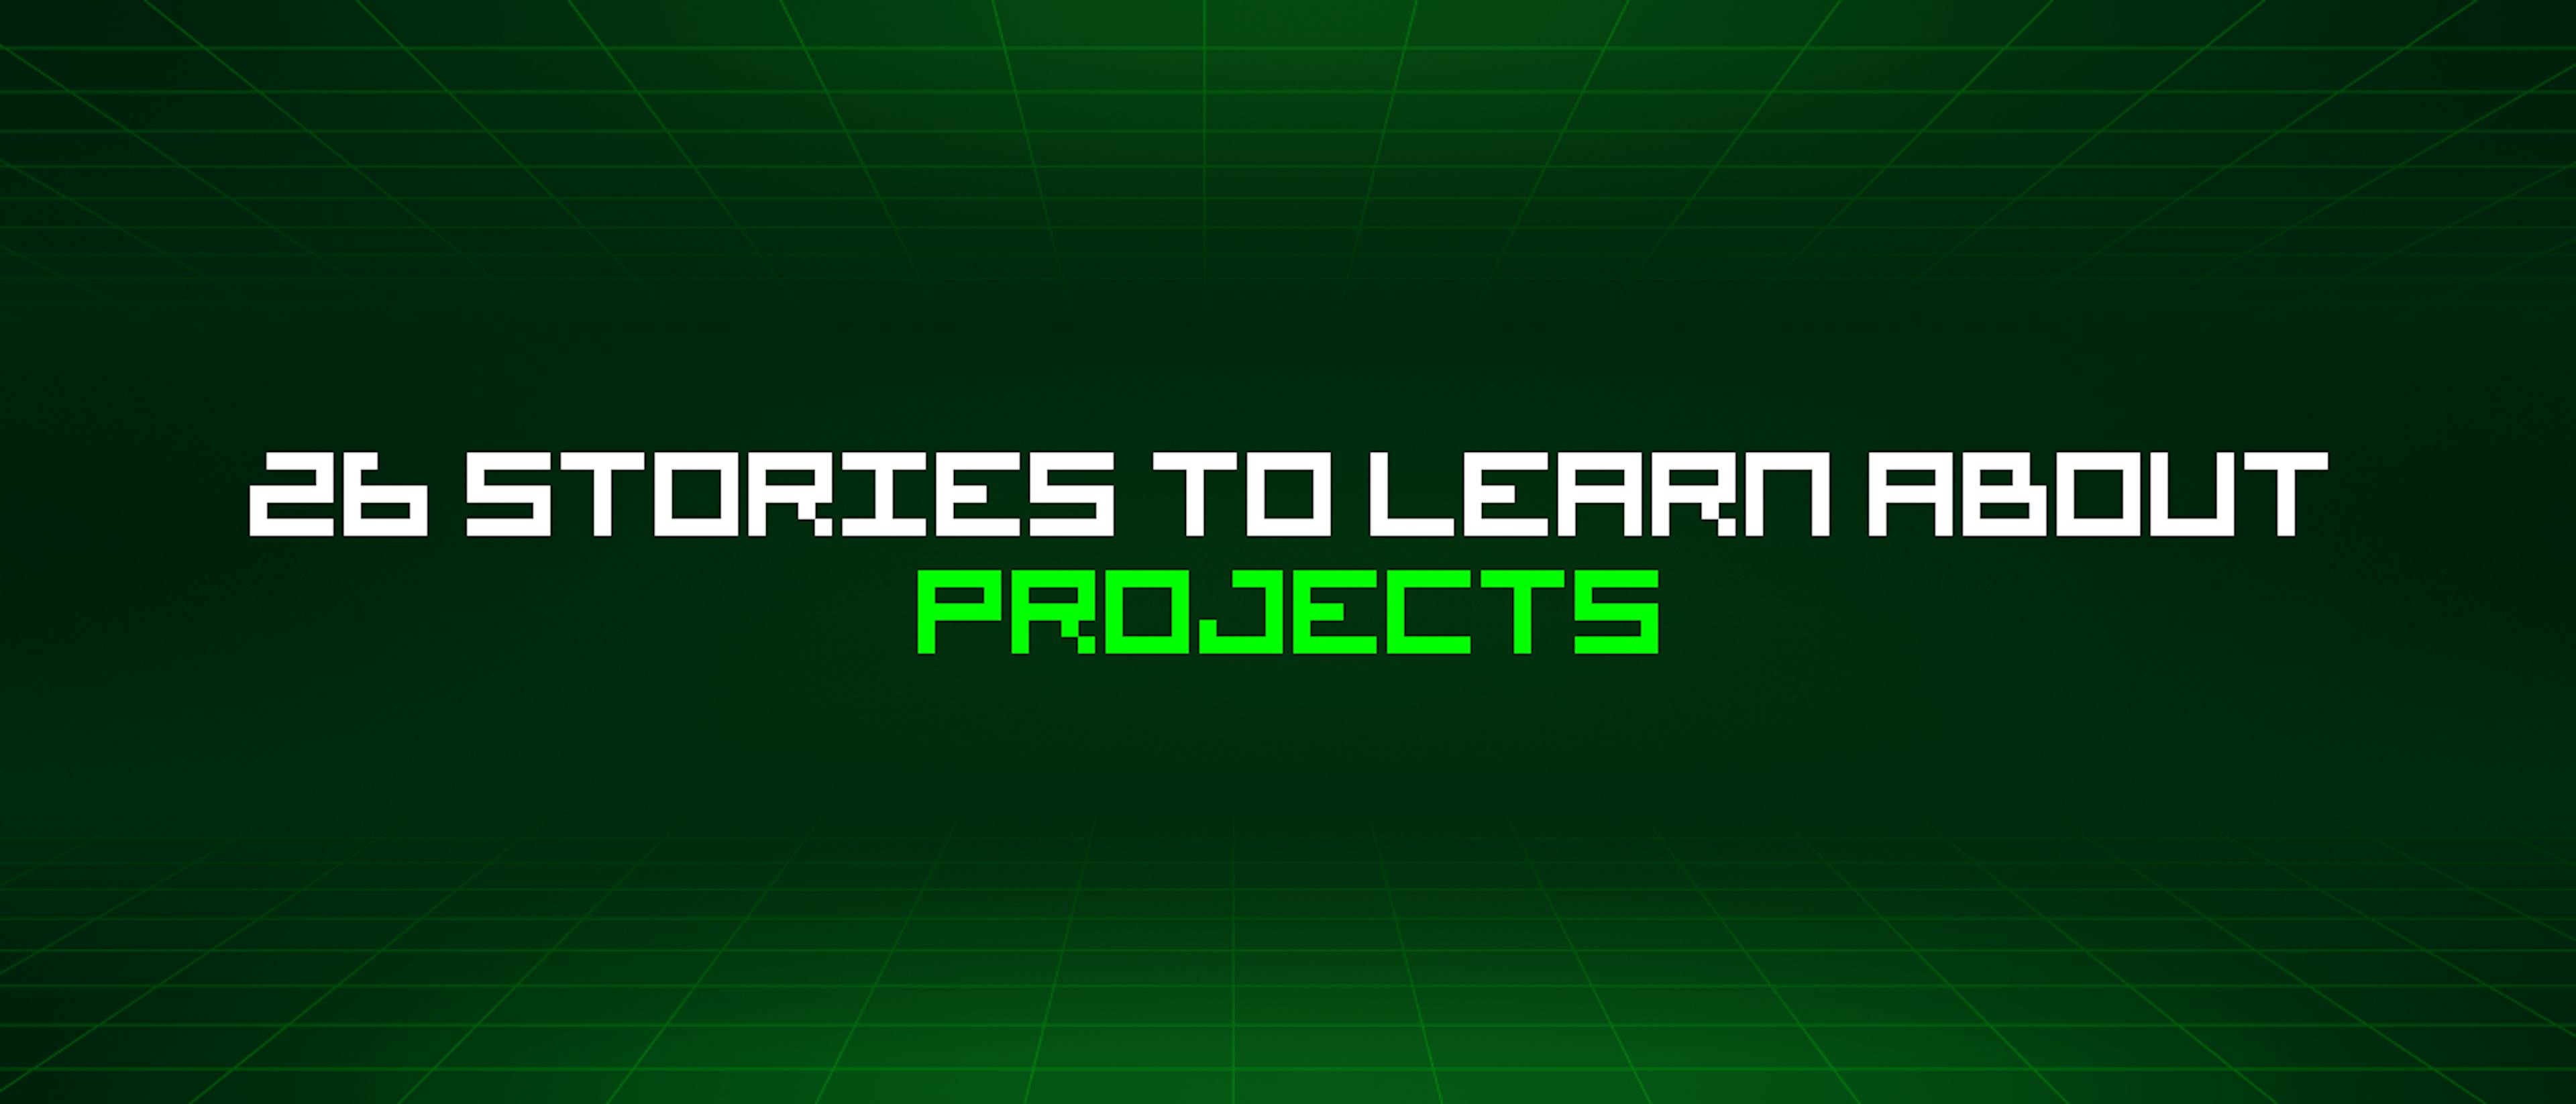 featured image - 26 Stories To Learn About Projects